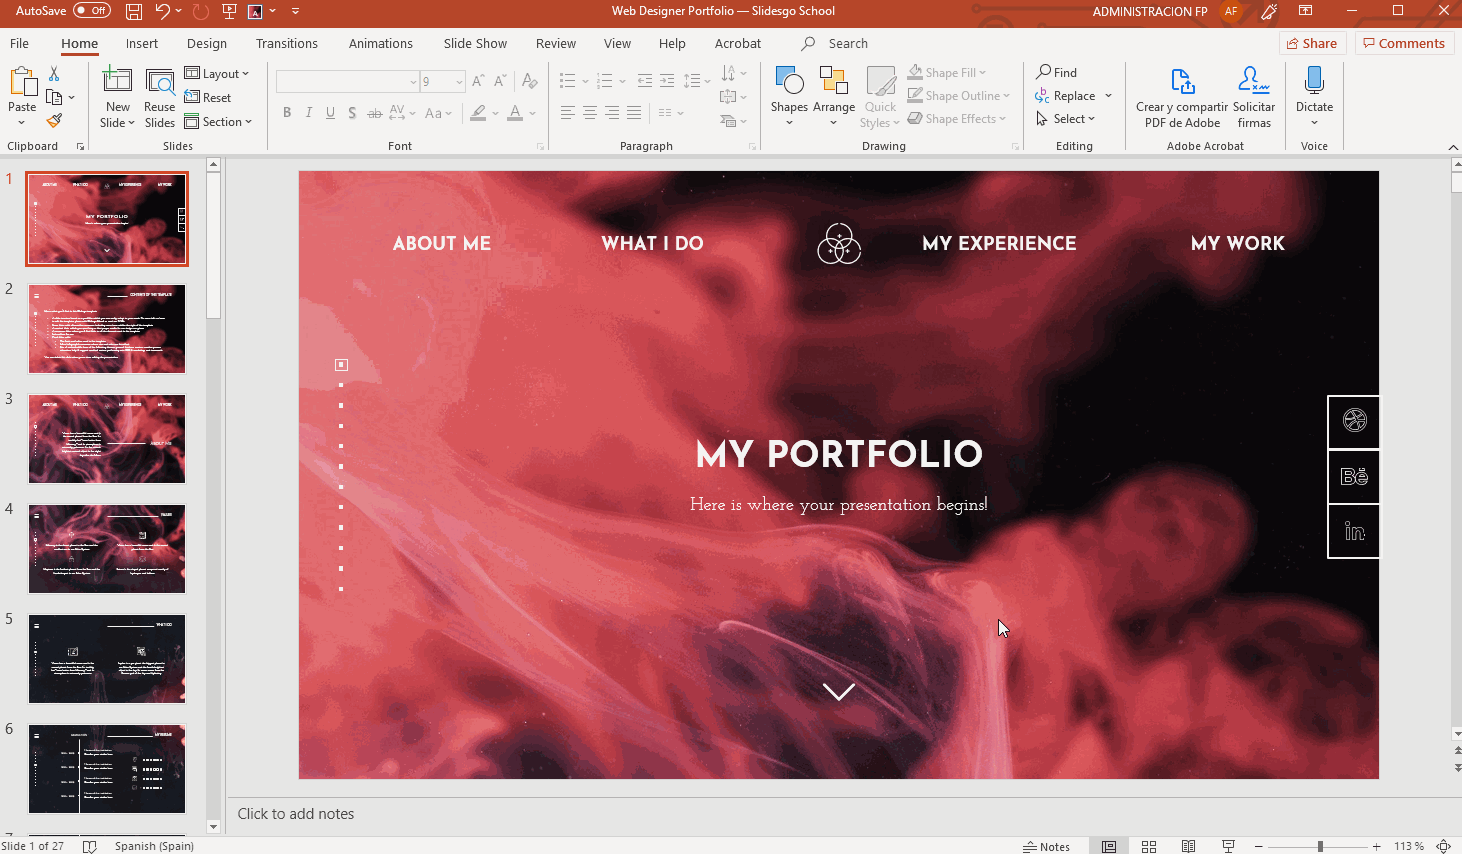 How to Insert, Crop or Mask Images in PowerPoint -4